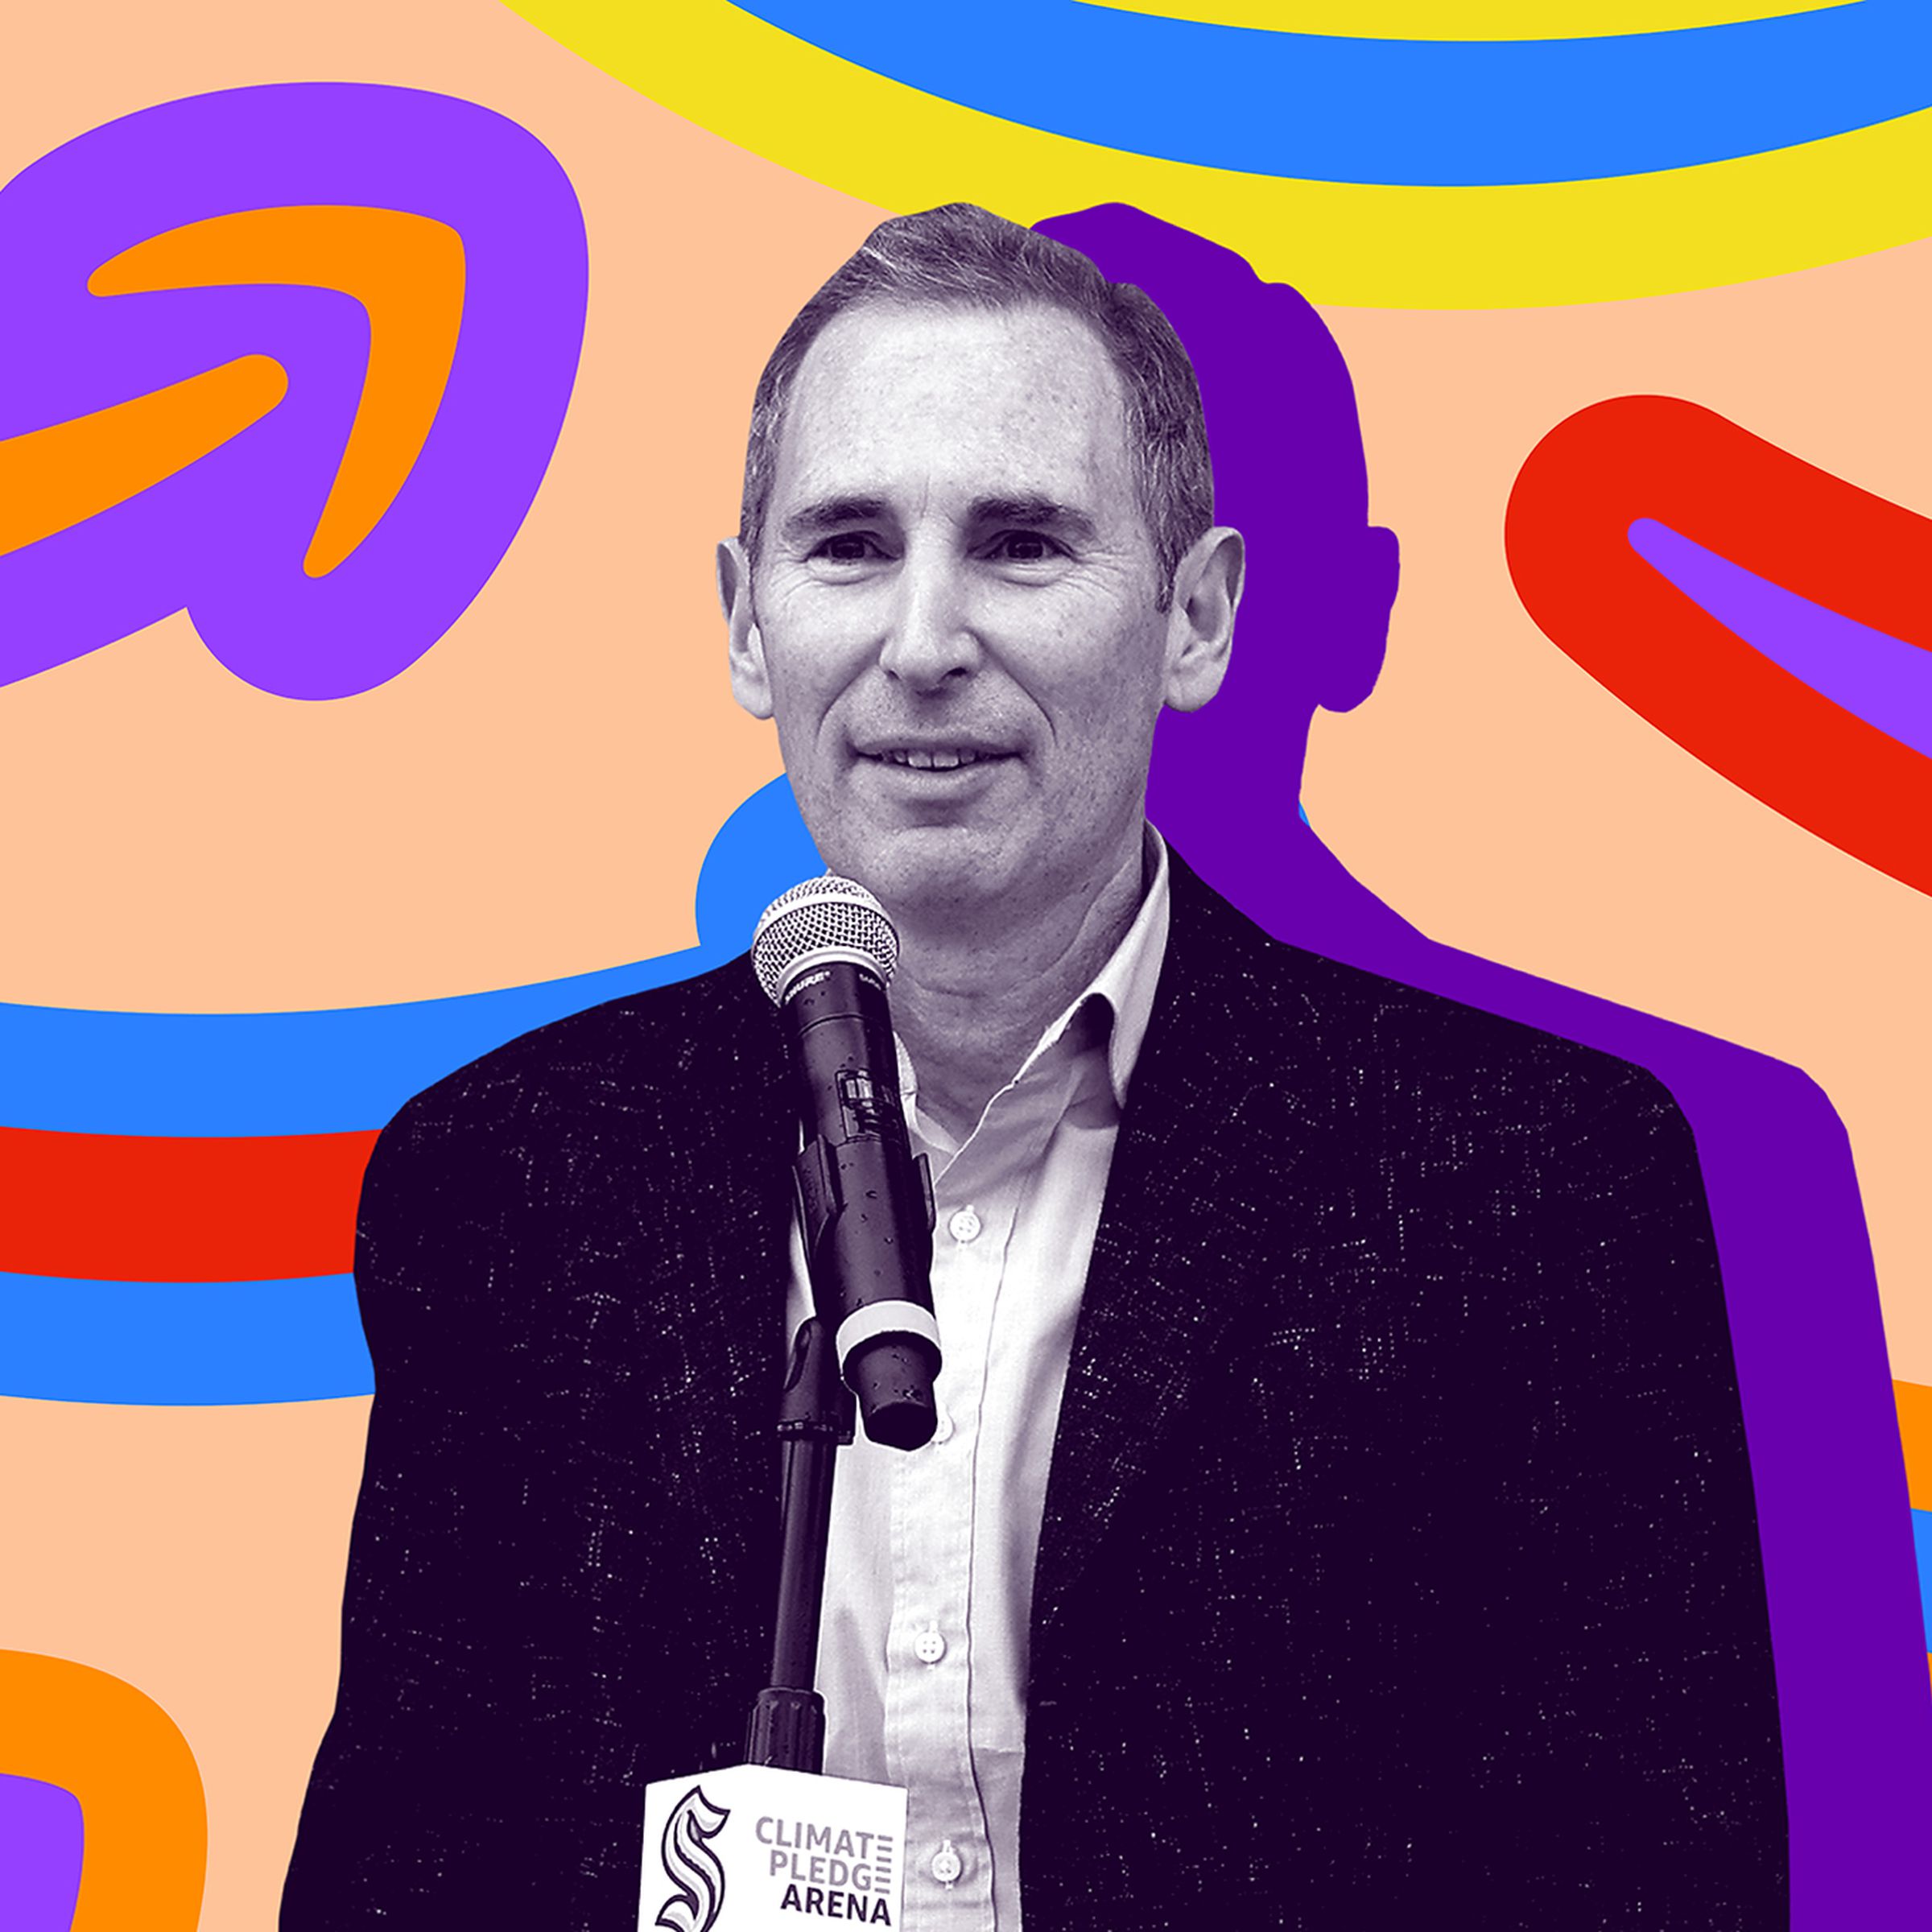 An image showing Amazon CEO Andy Jassy on a colorful background